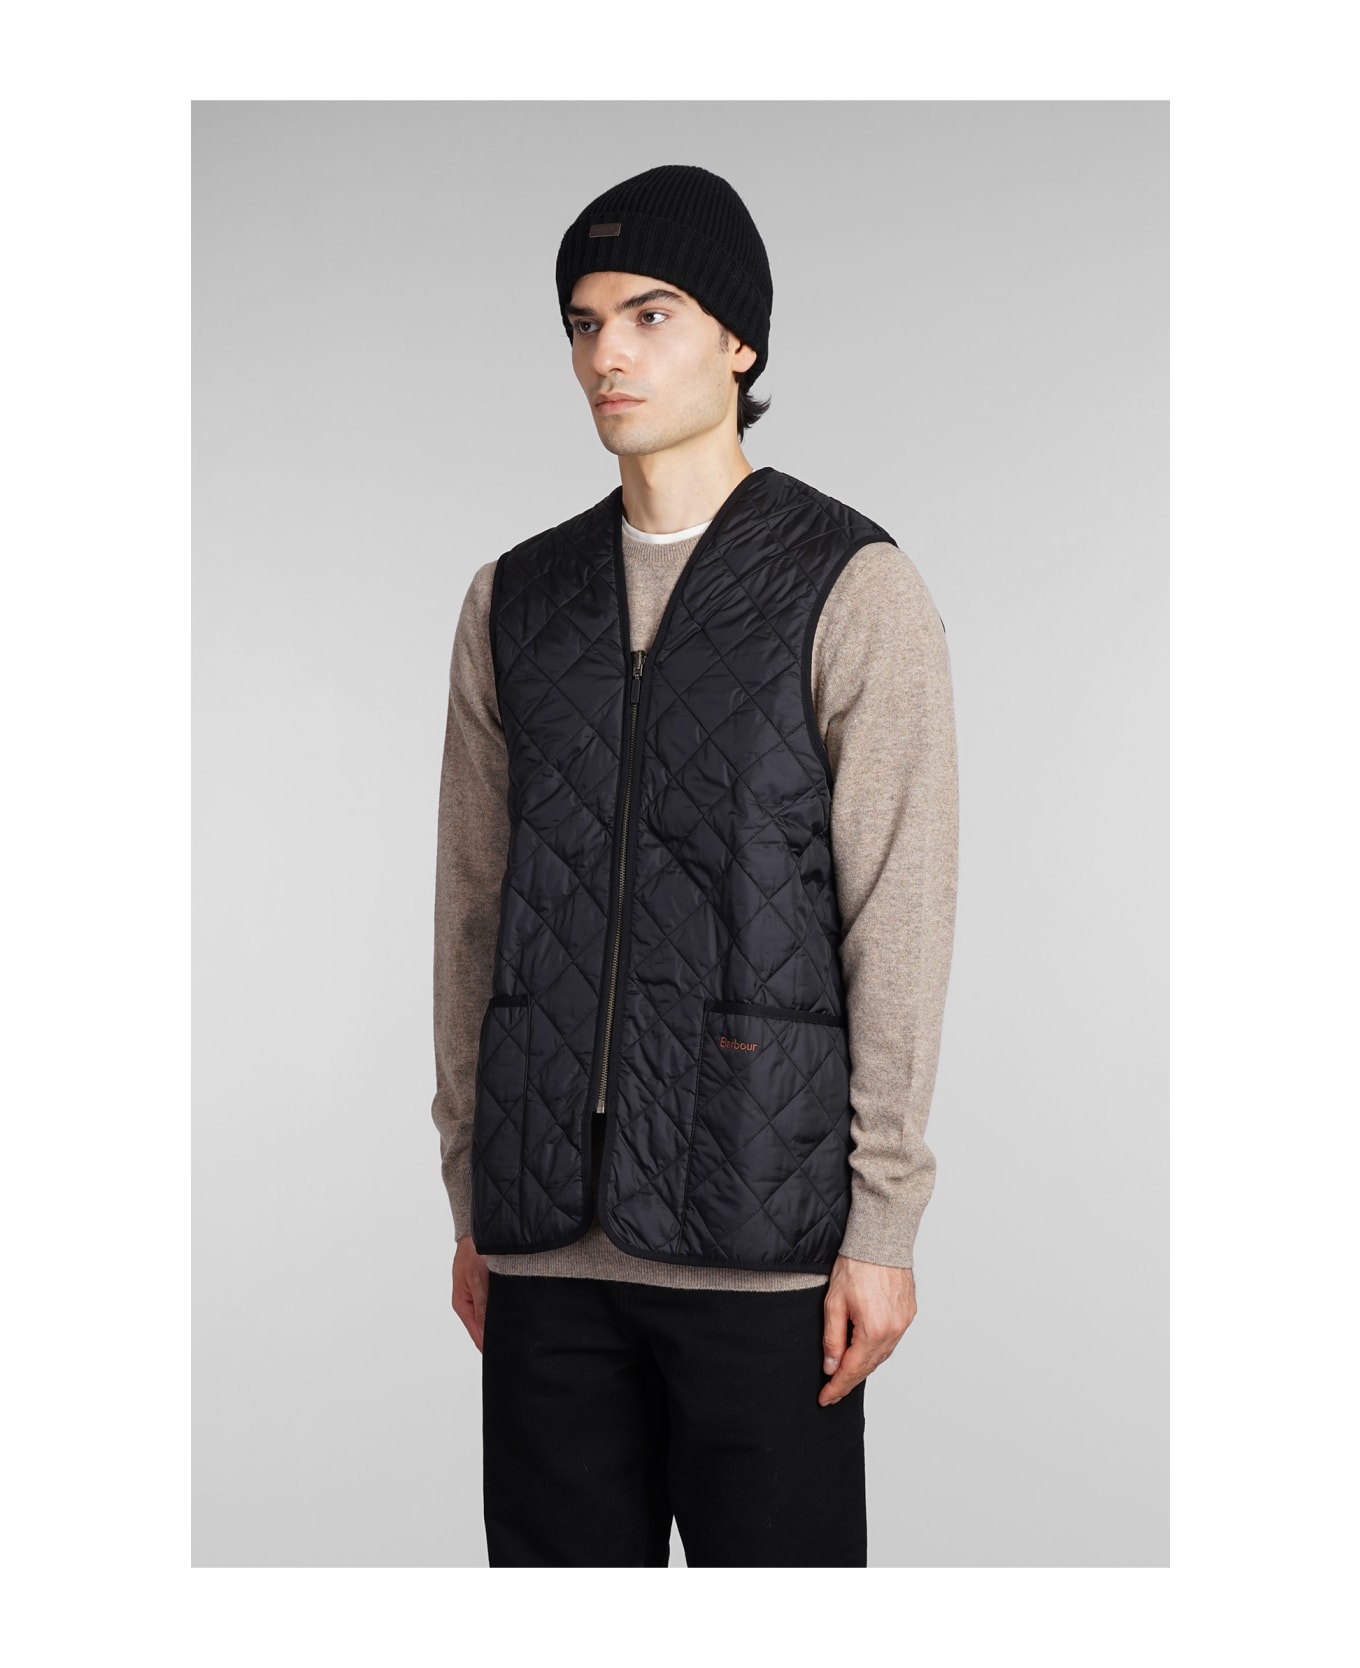 Barbour Quilted Waistco Vest In Black Polyamide - Black ベスト